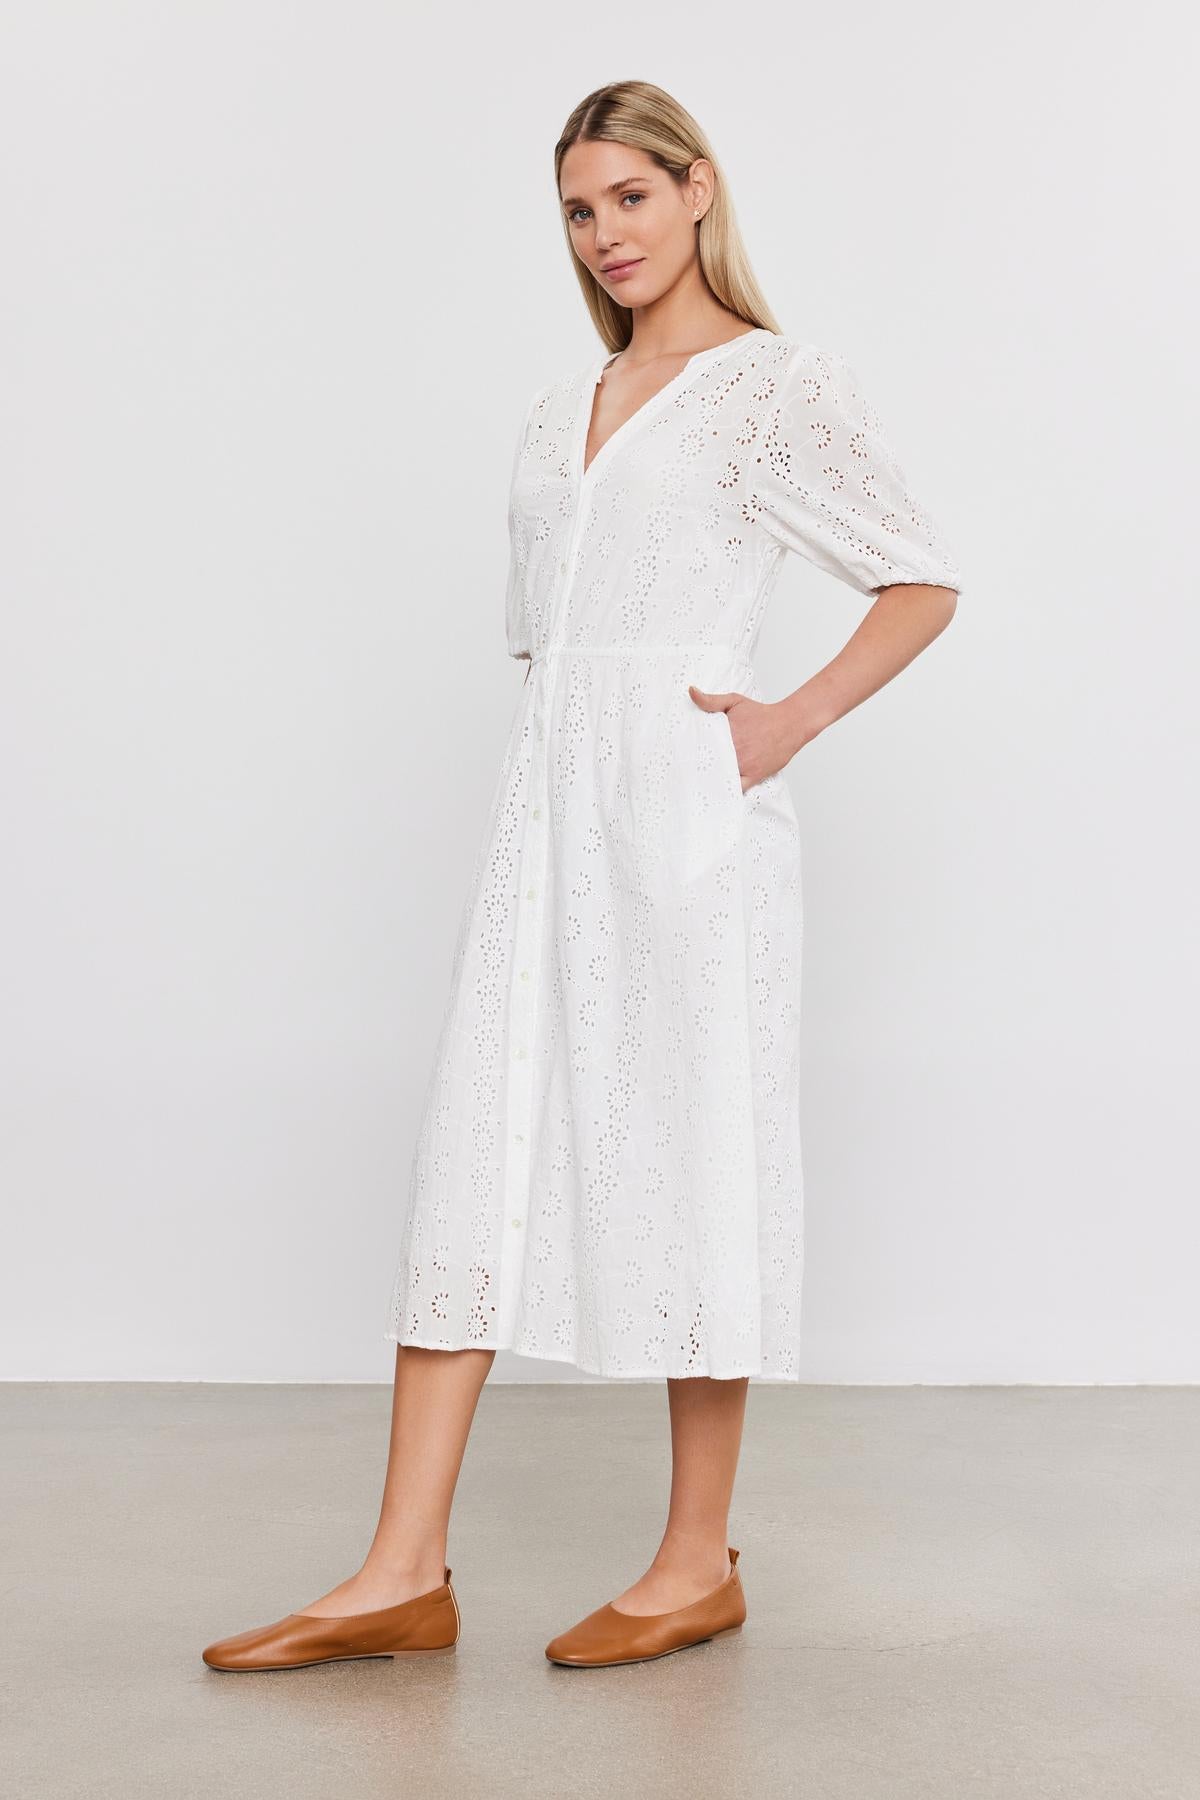 Woman in a white cotton eyelet RORI DRESS with puff sleeves and brown flat shoes, standing against a plain gray background from Velvet by Graham & Spencer.-36910267957441